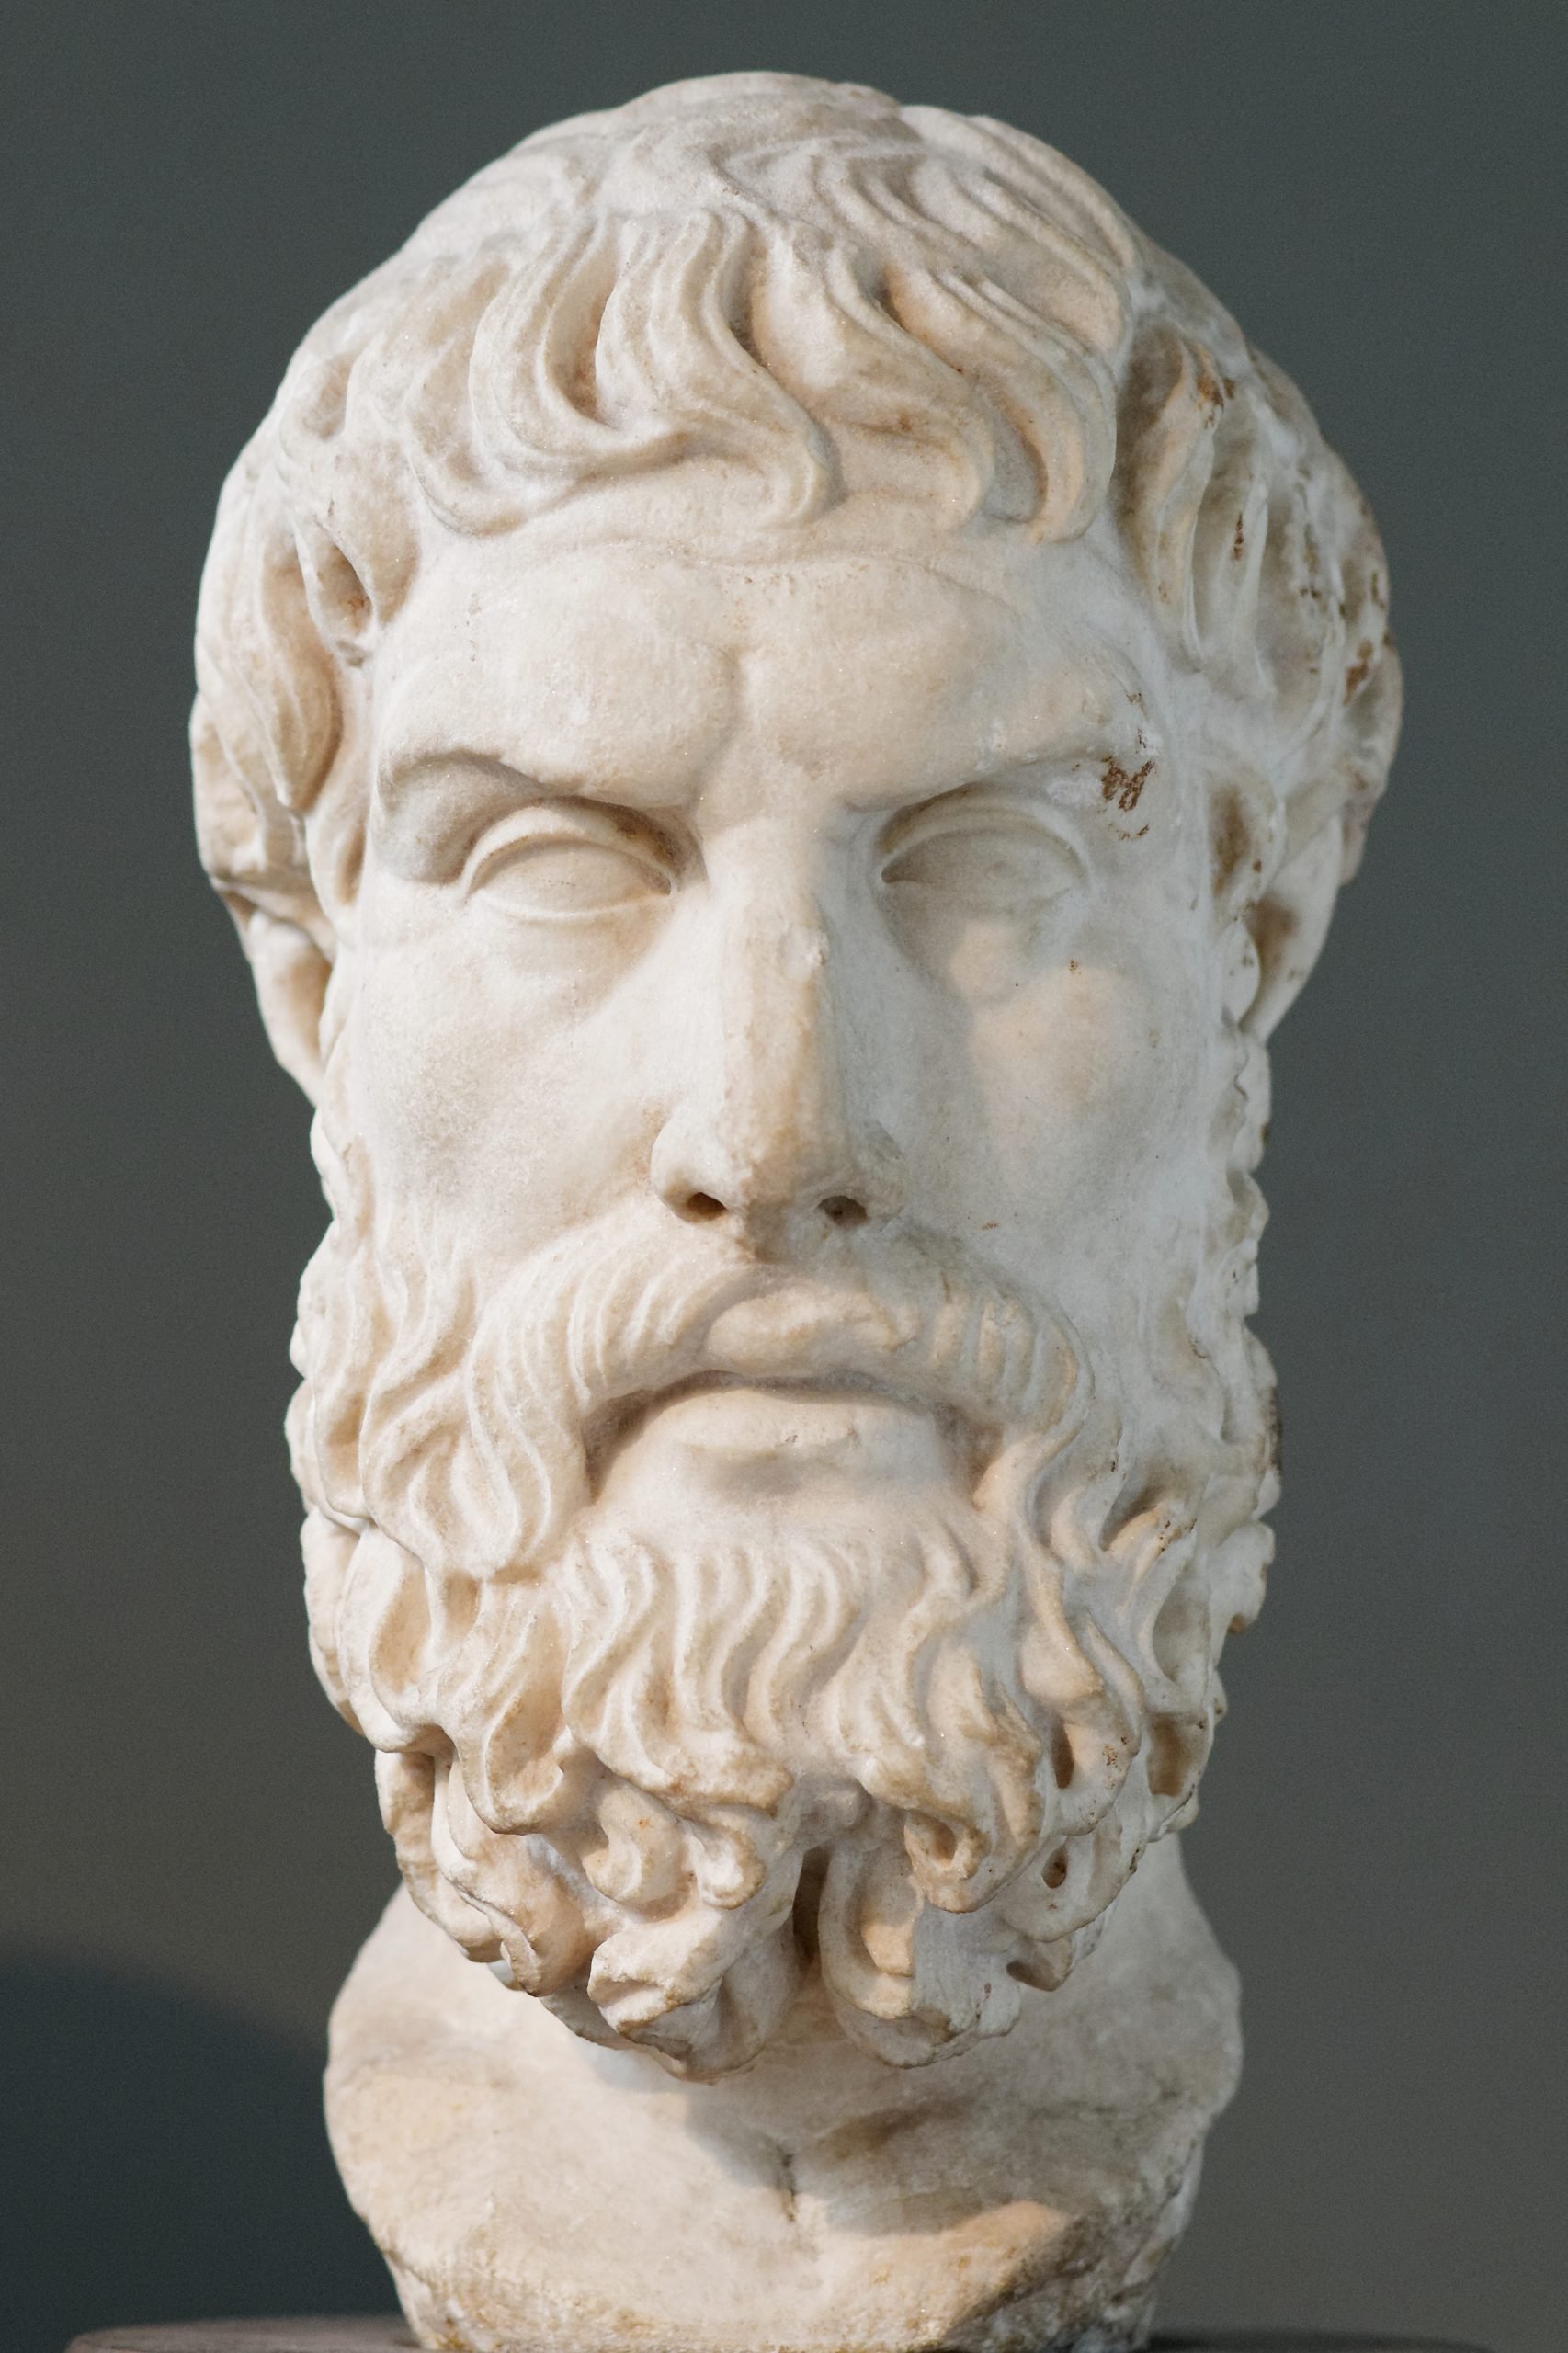 What Star Sign is Epicurus?